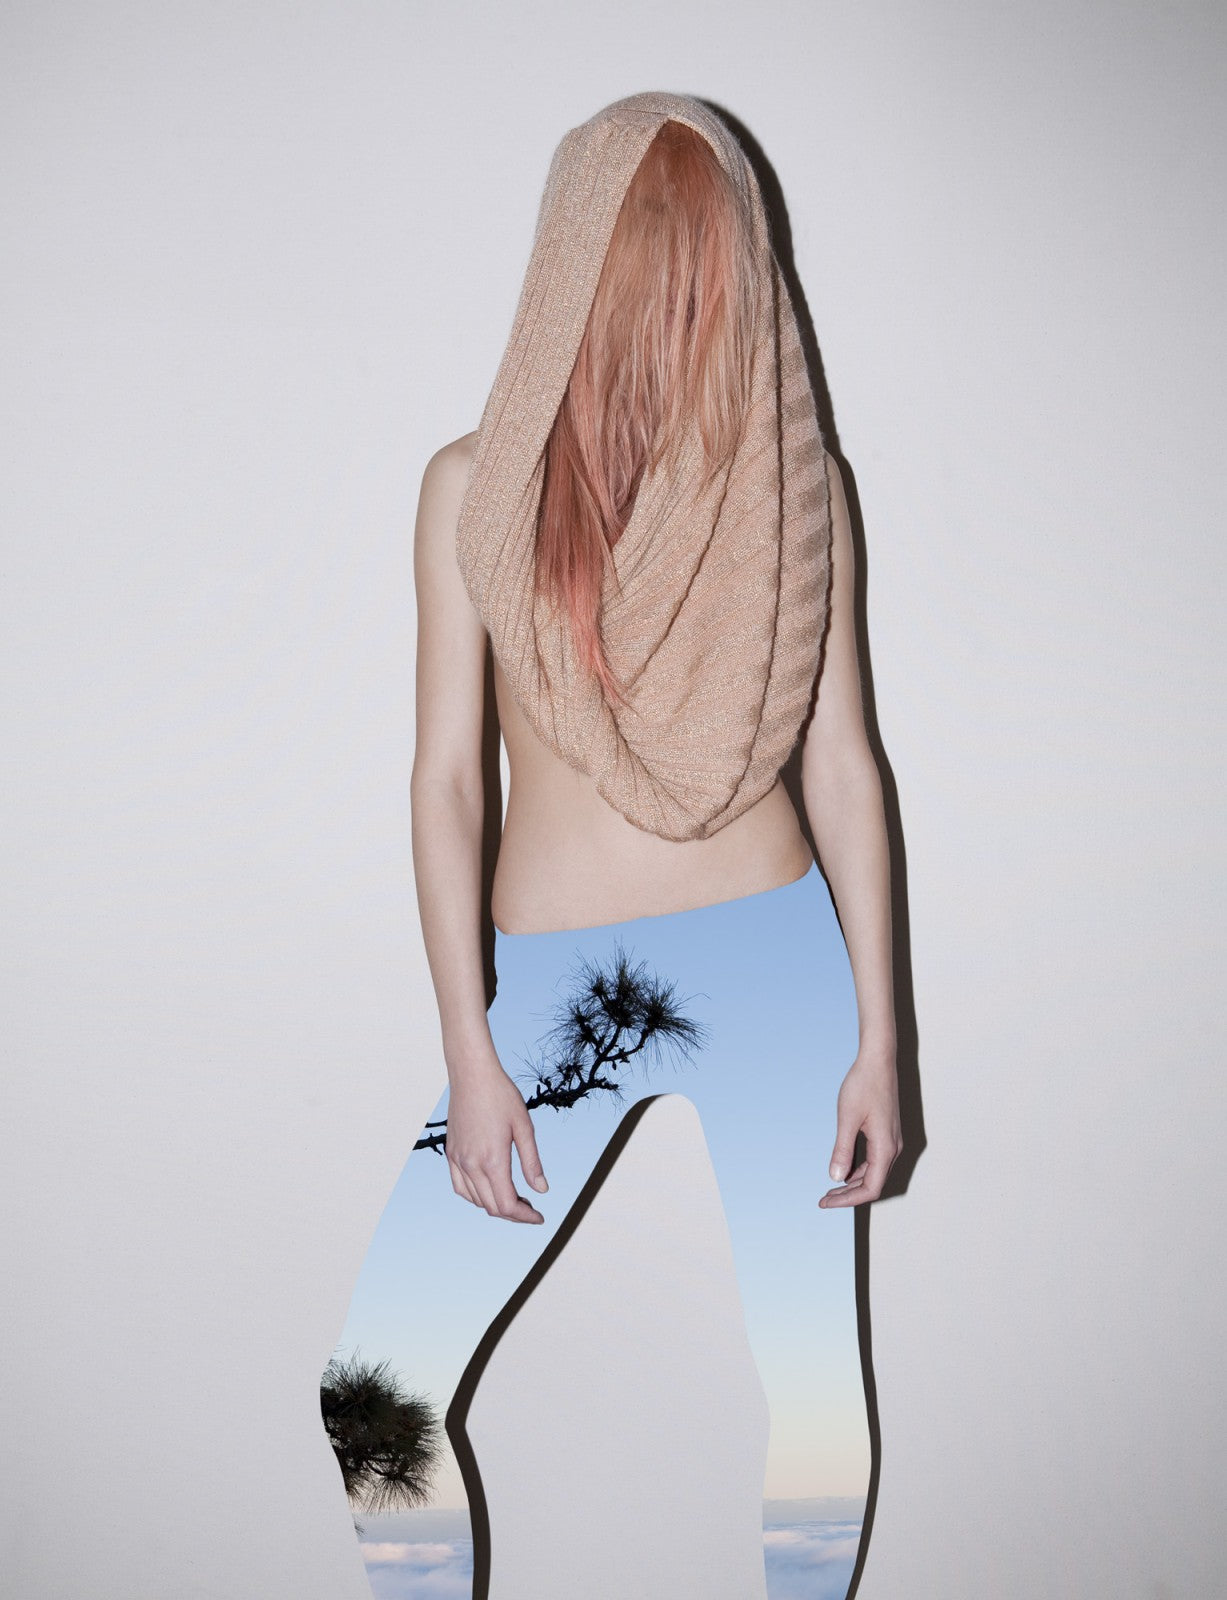 Viviane Sassen — In and Out of Fashion